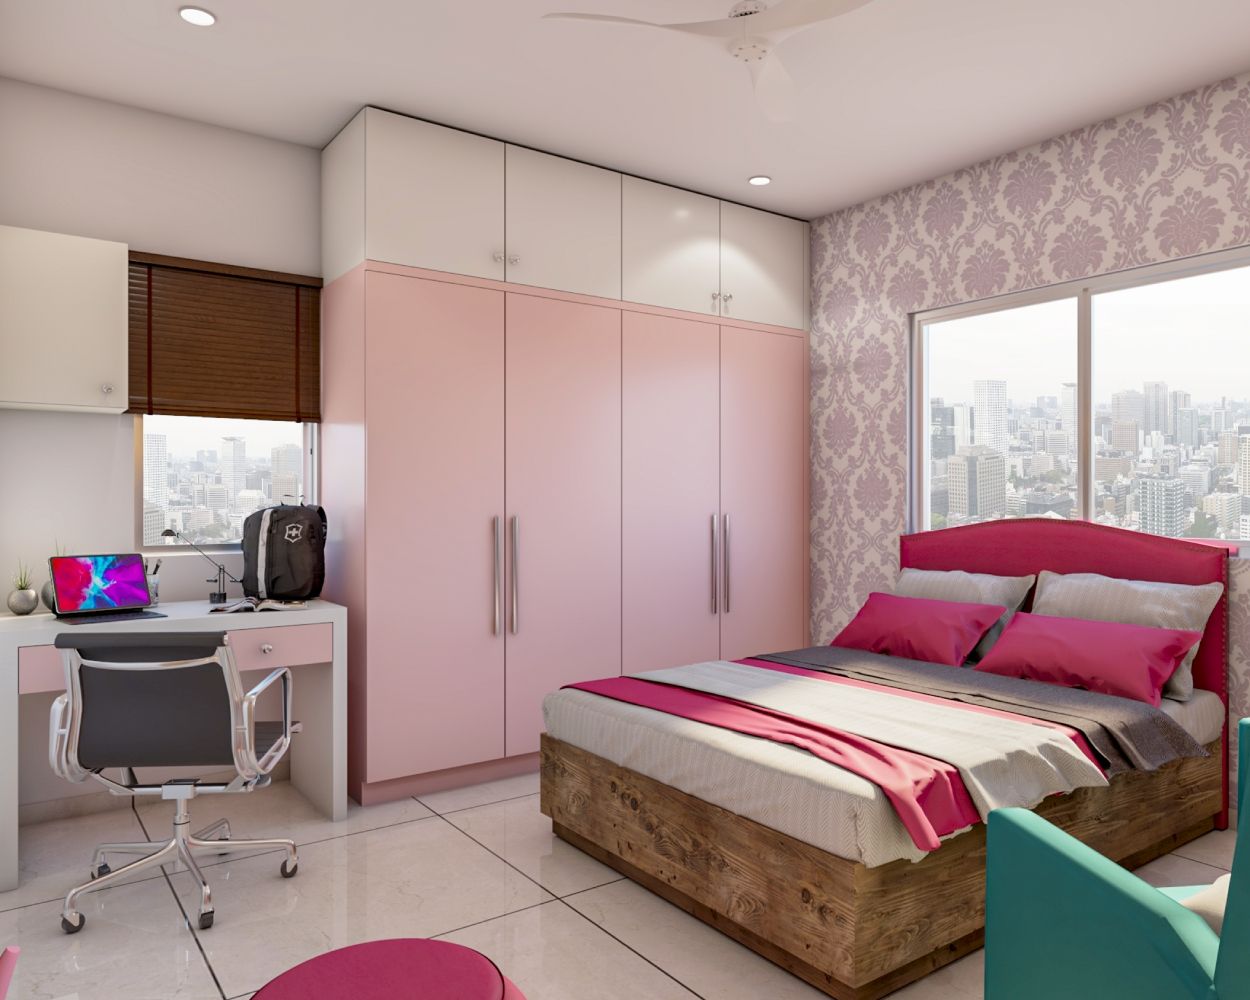 Modern Master Bedroom Design With Pink Interiors